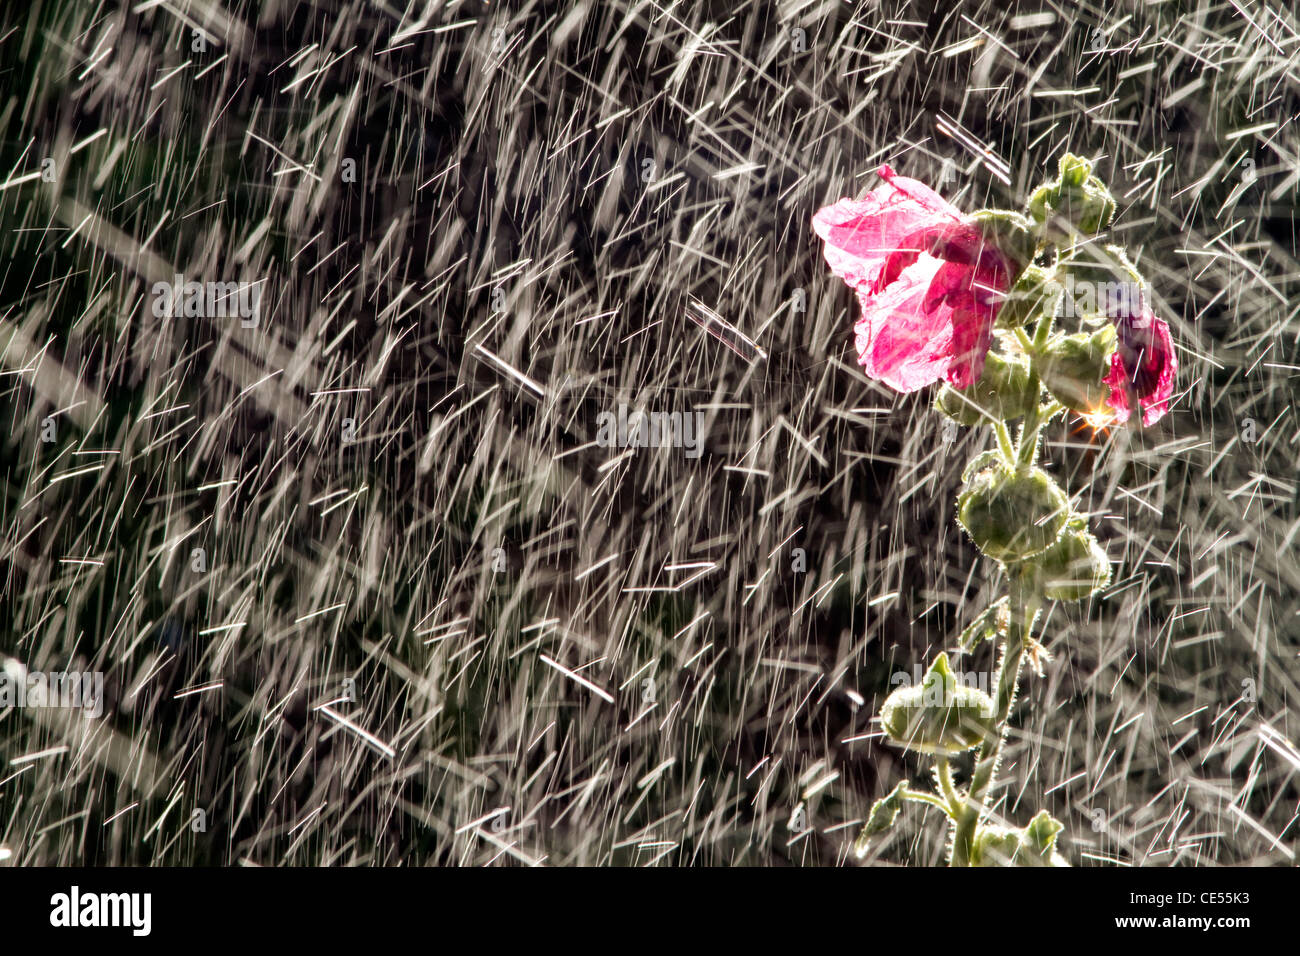 Hollyhock flowering plant being watered by a sprinkler in Boise, Idaho, USA. Stock Photo